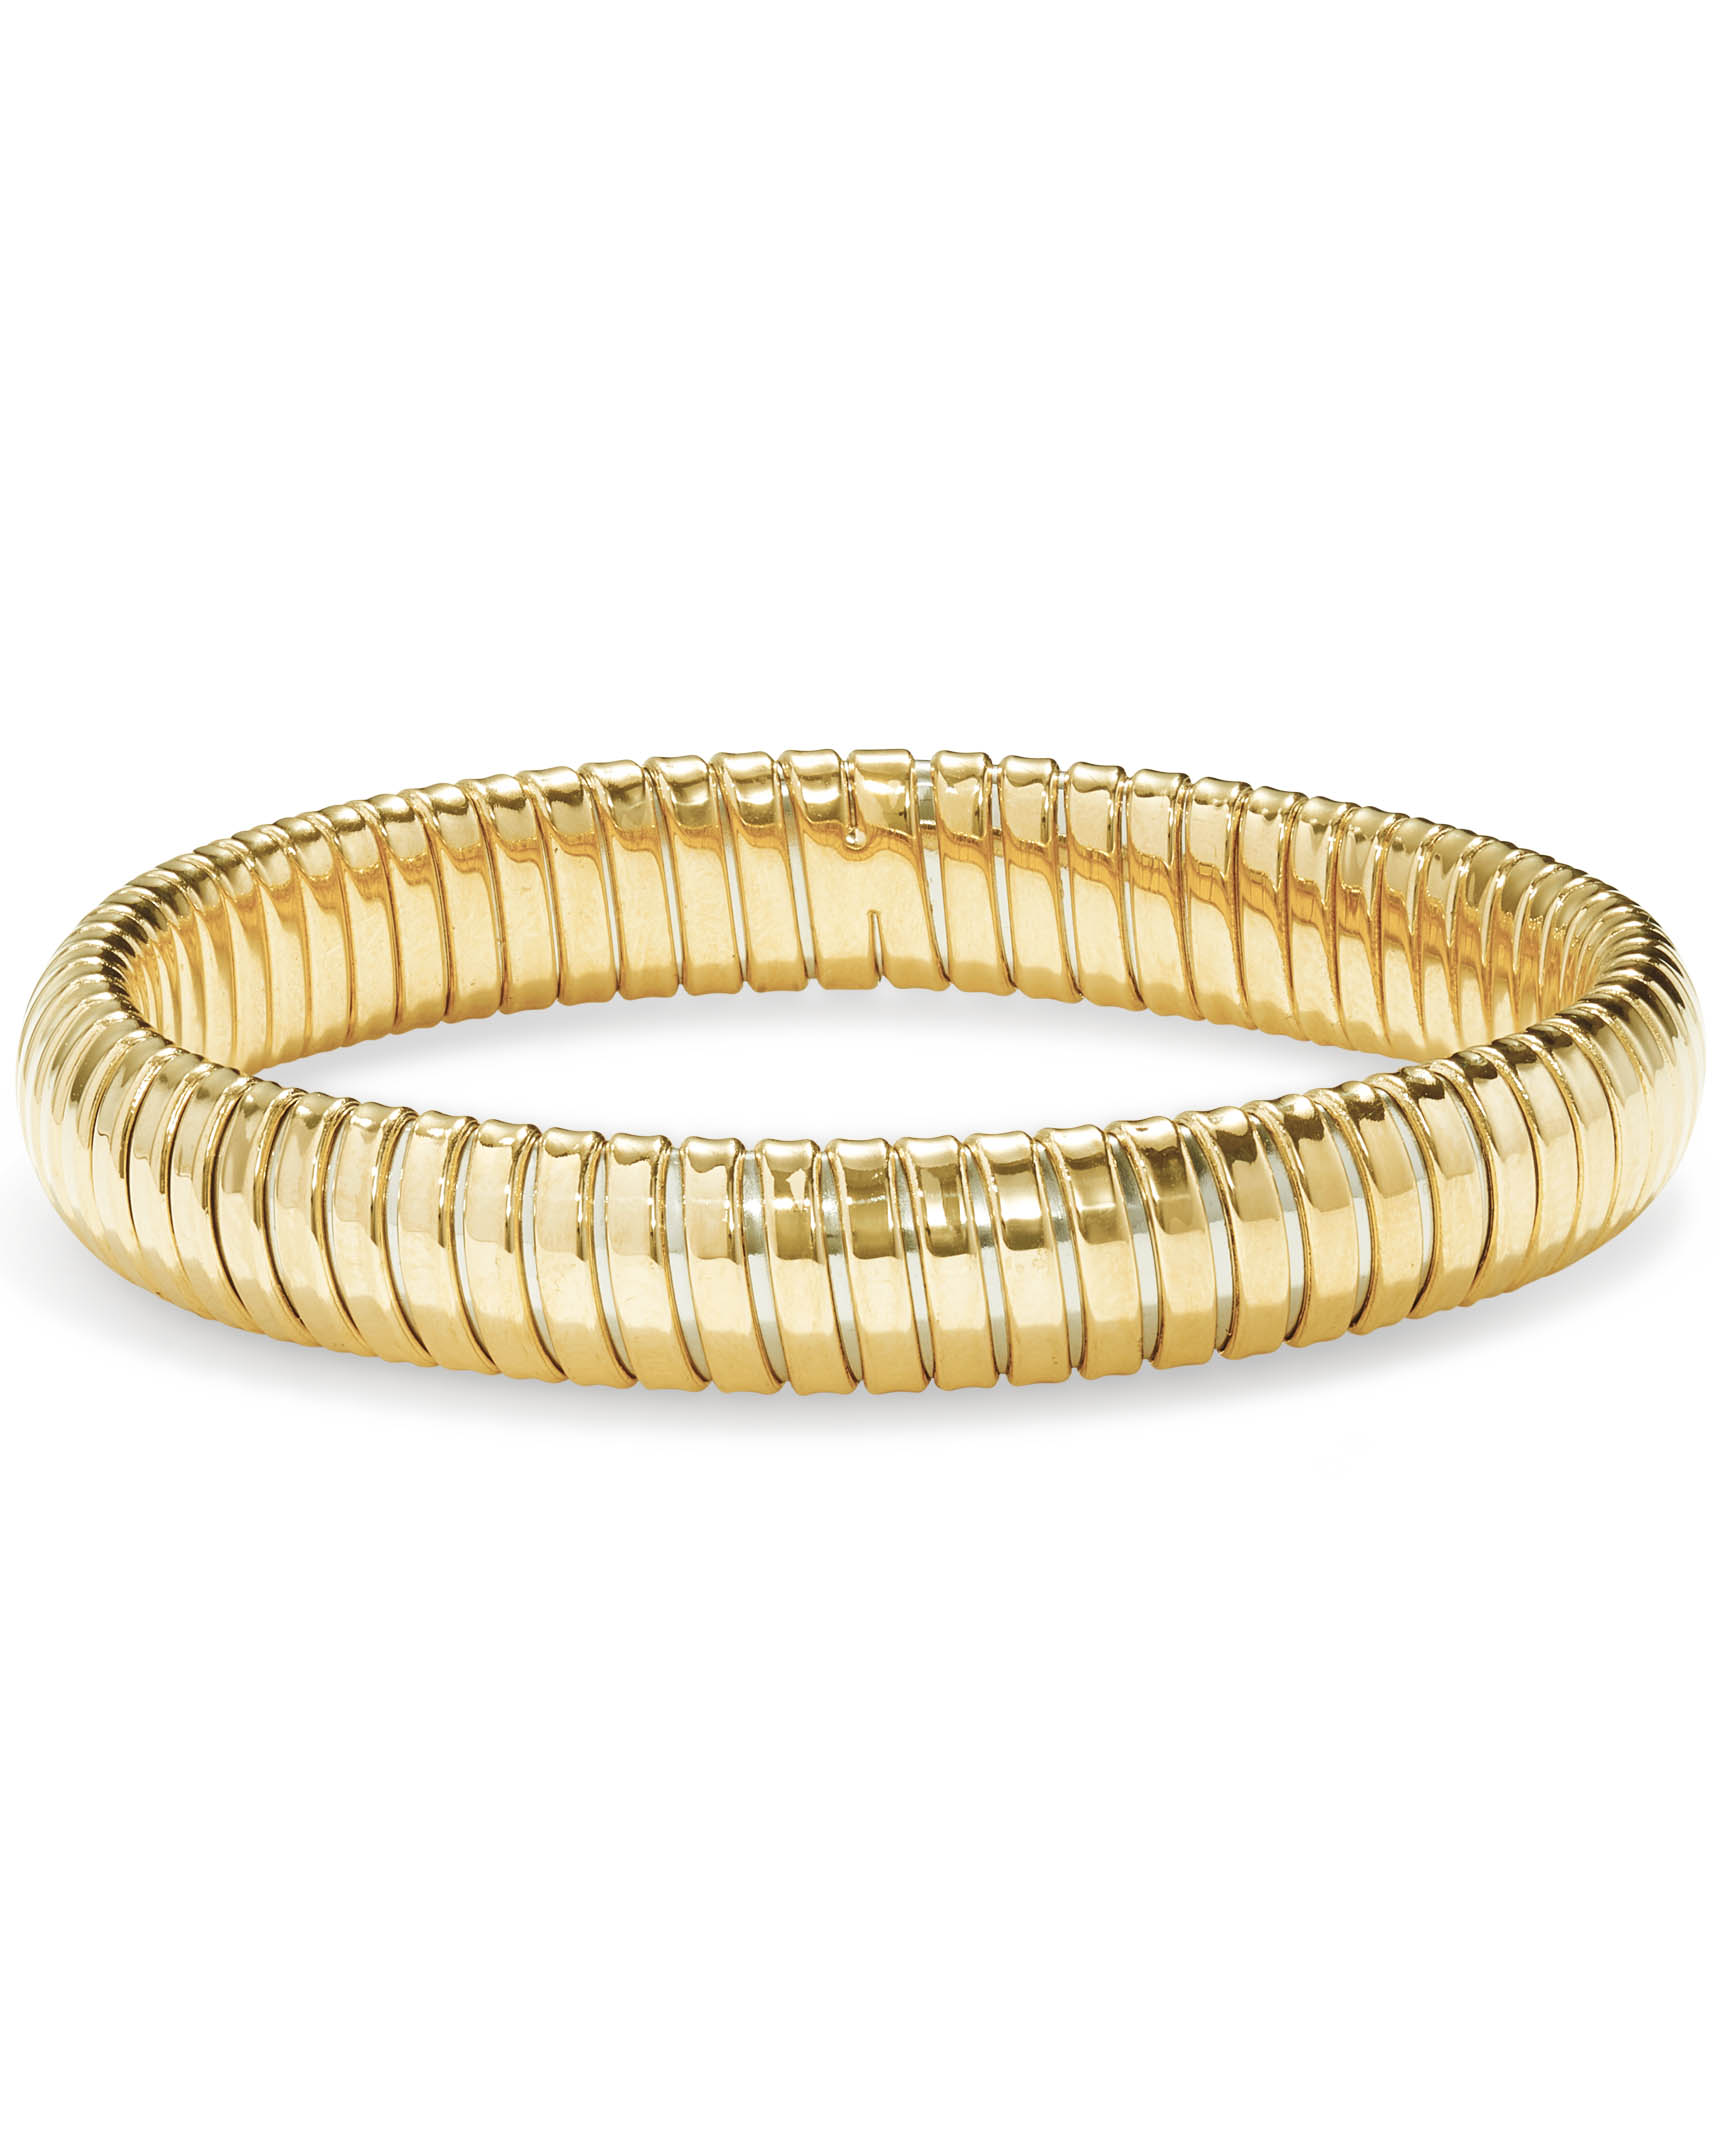 iJewelry2 Gold Plated Sterling Silver Designer Love Knot Wire Bangle  Bracelet - Walmart.com